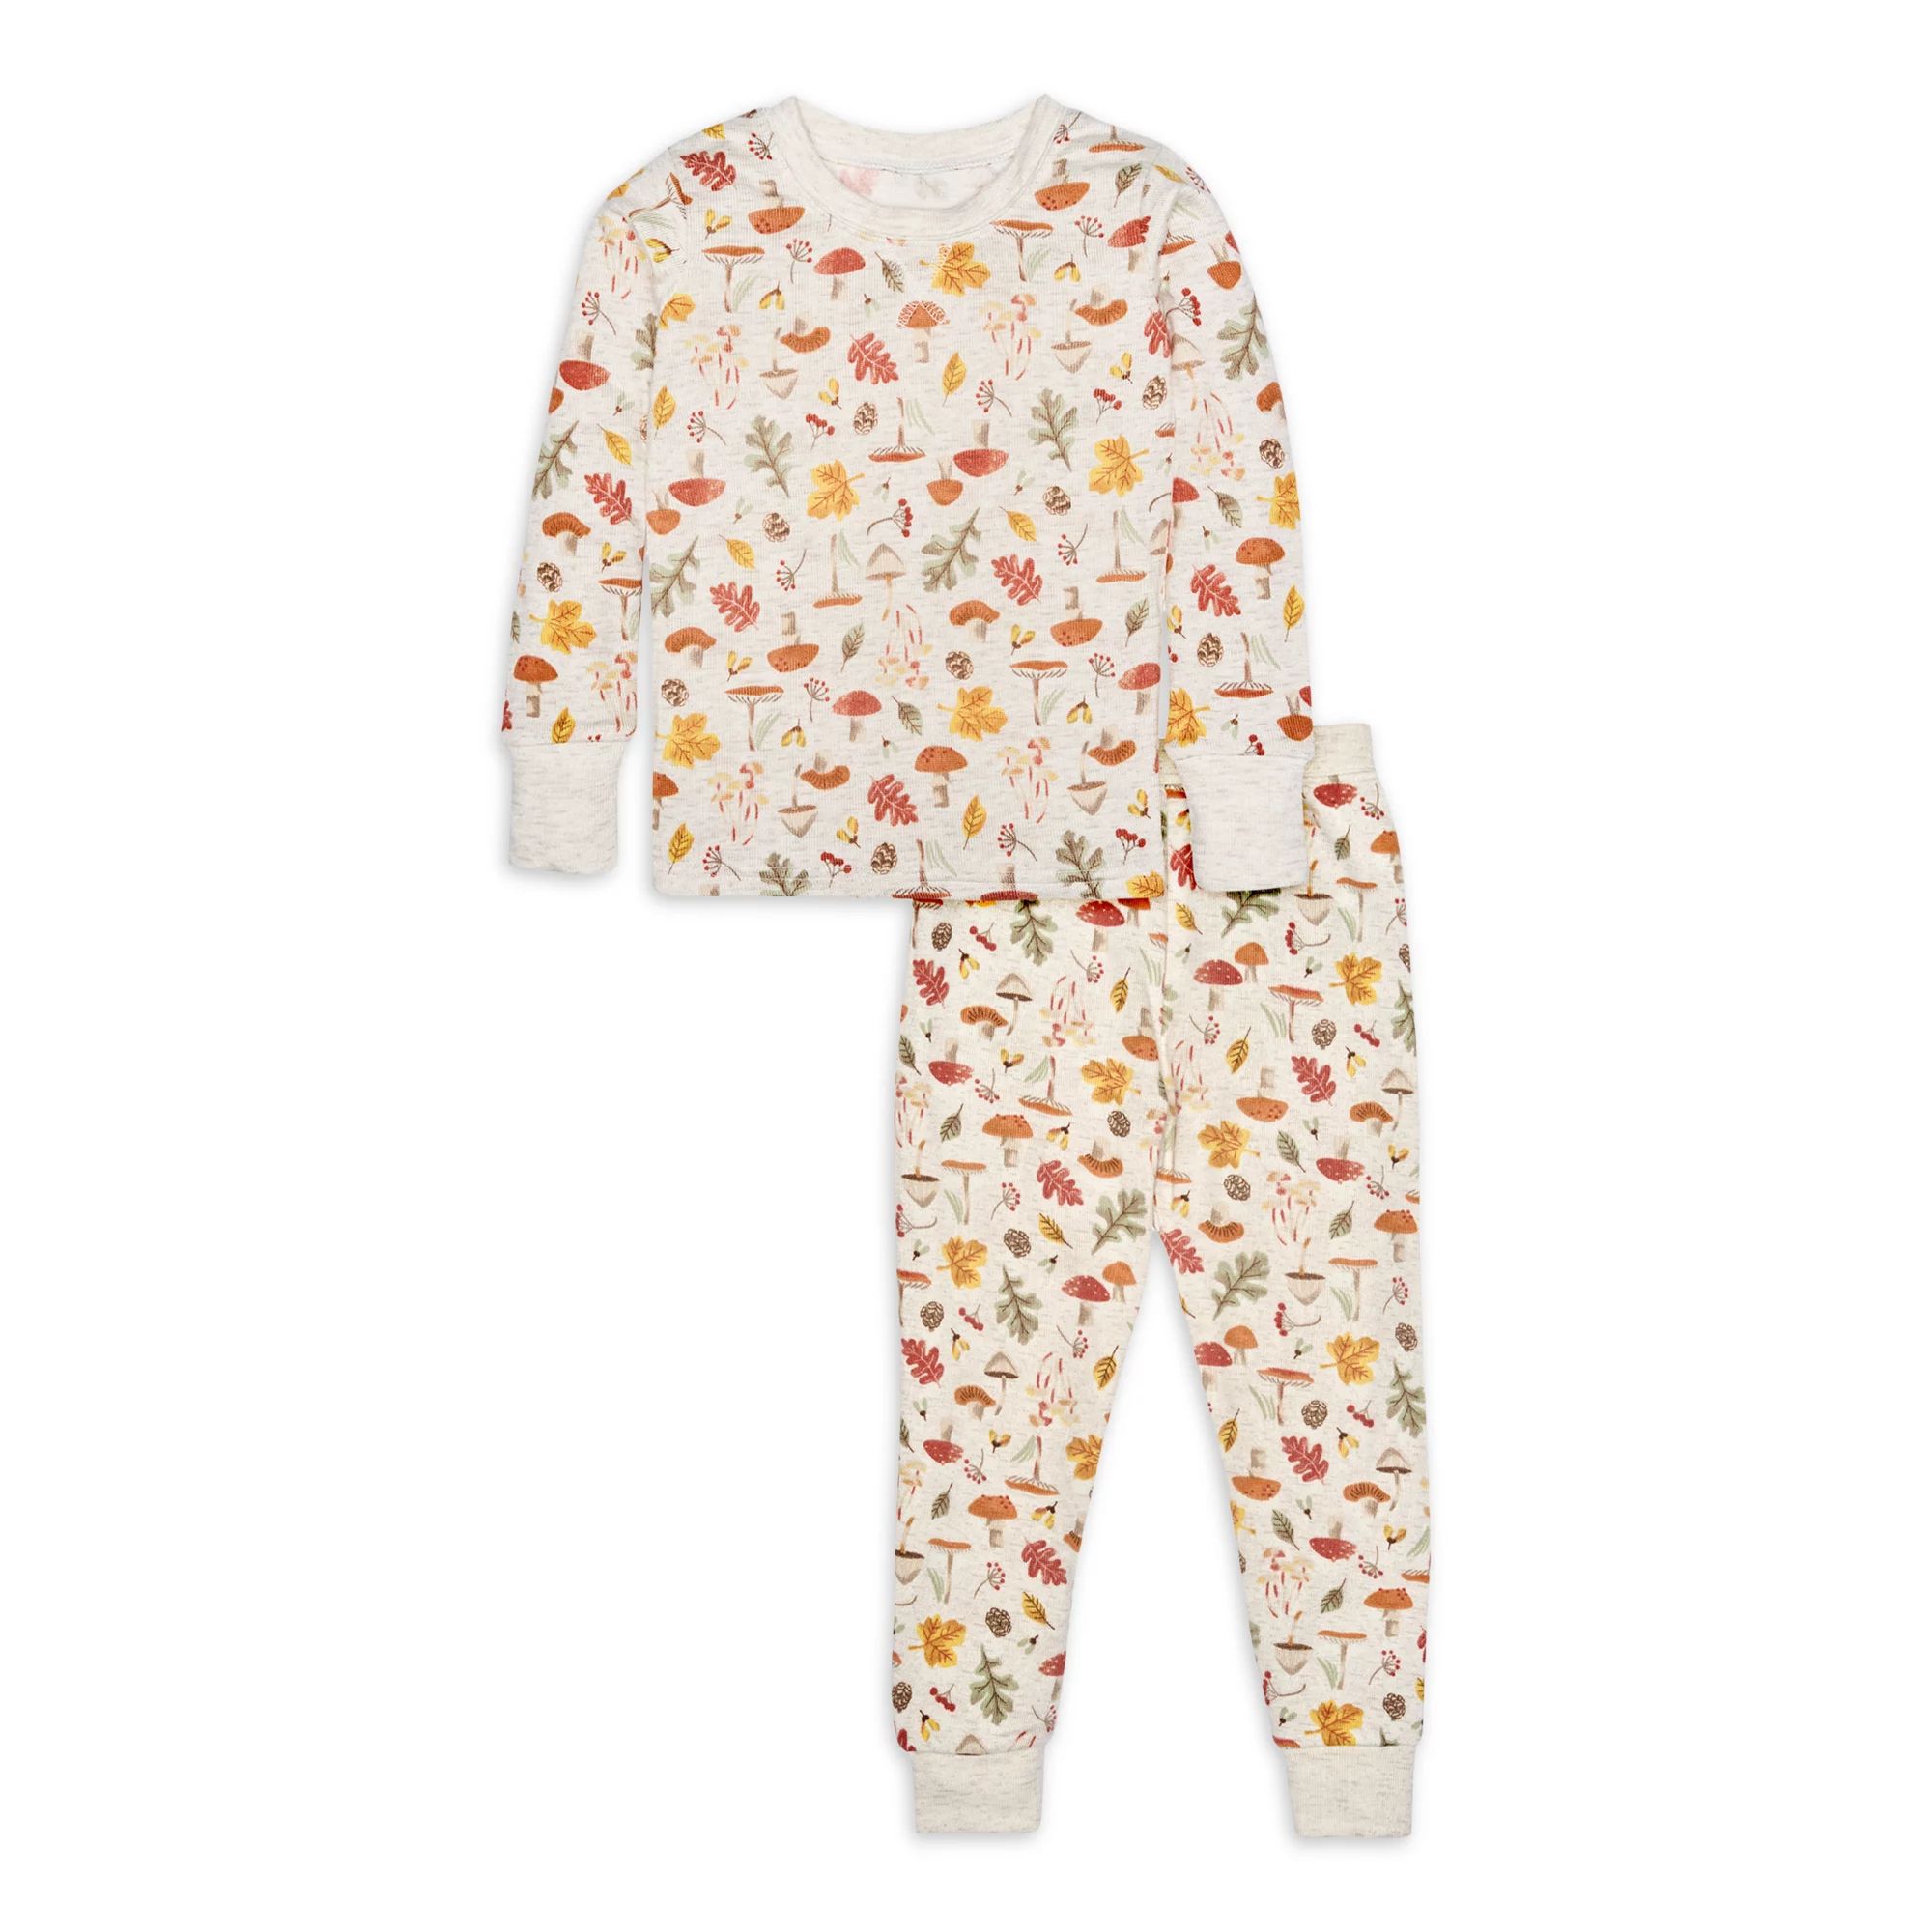 Modern Moments By Gerber Toddler Girl Tight Fitting Pajamas Set, 2-Piece, Sizes 12M-5T | Walmart (US)